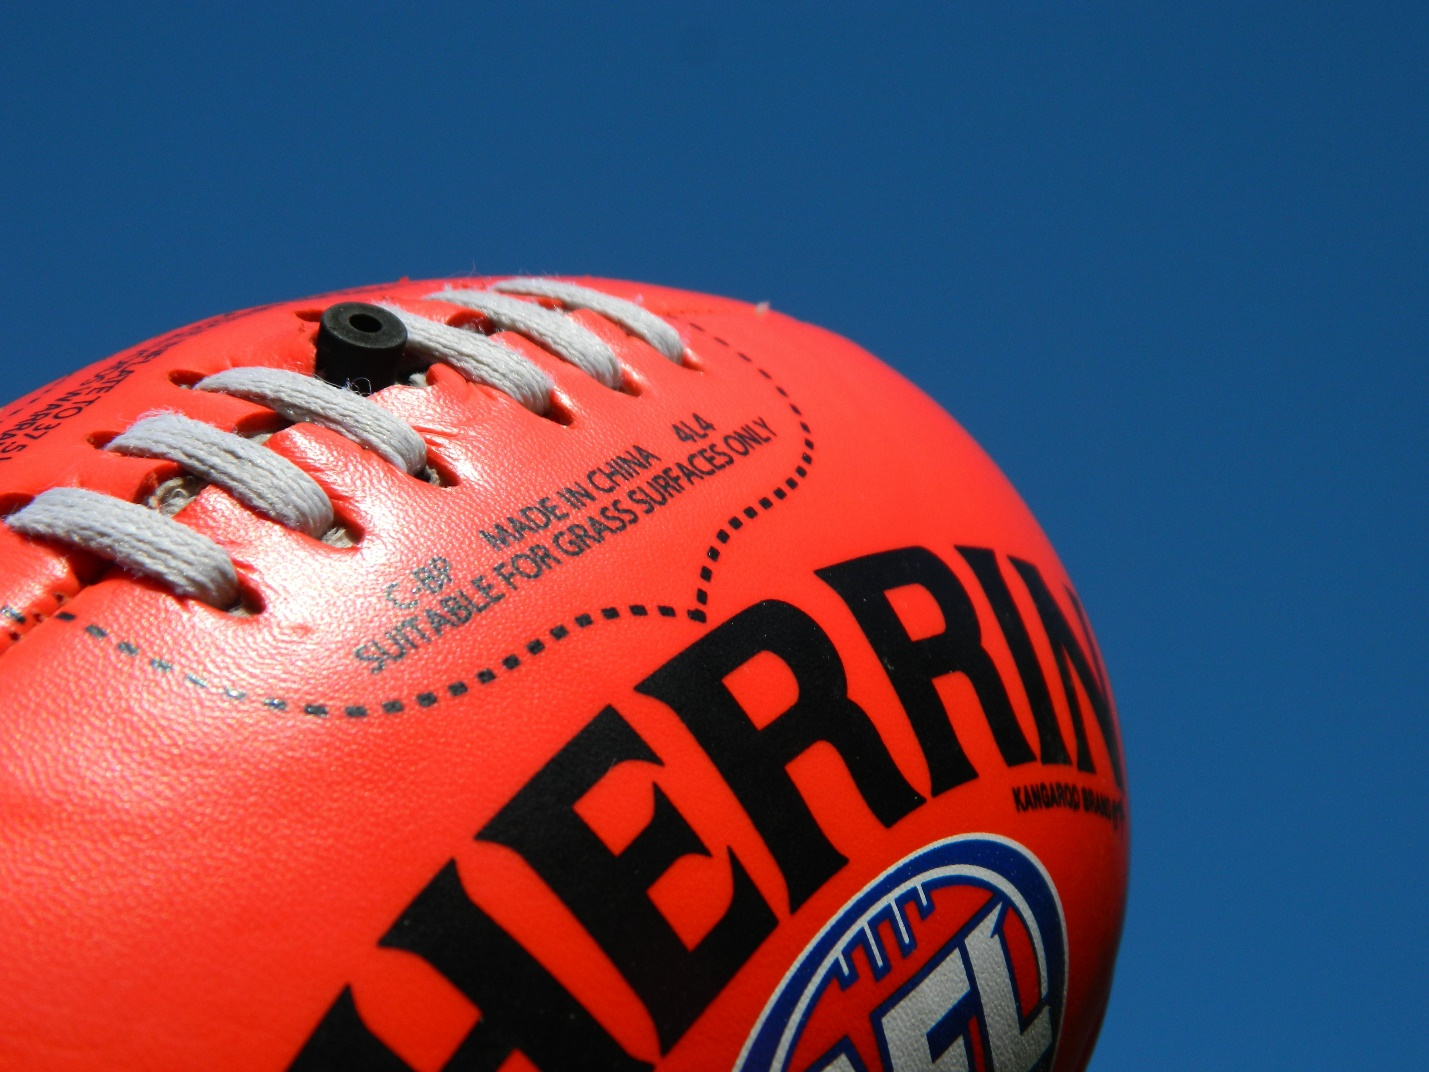 A football used in the AFL